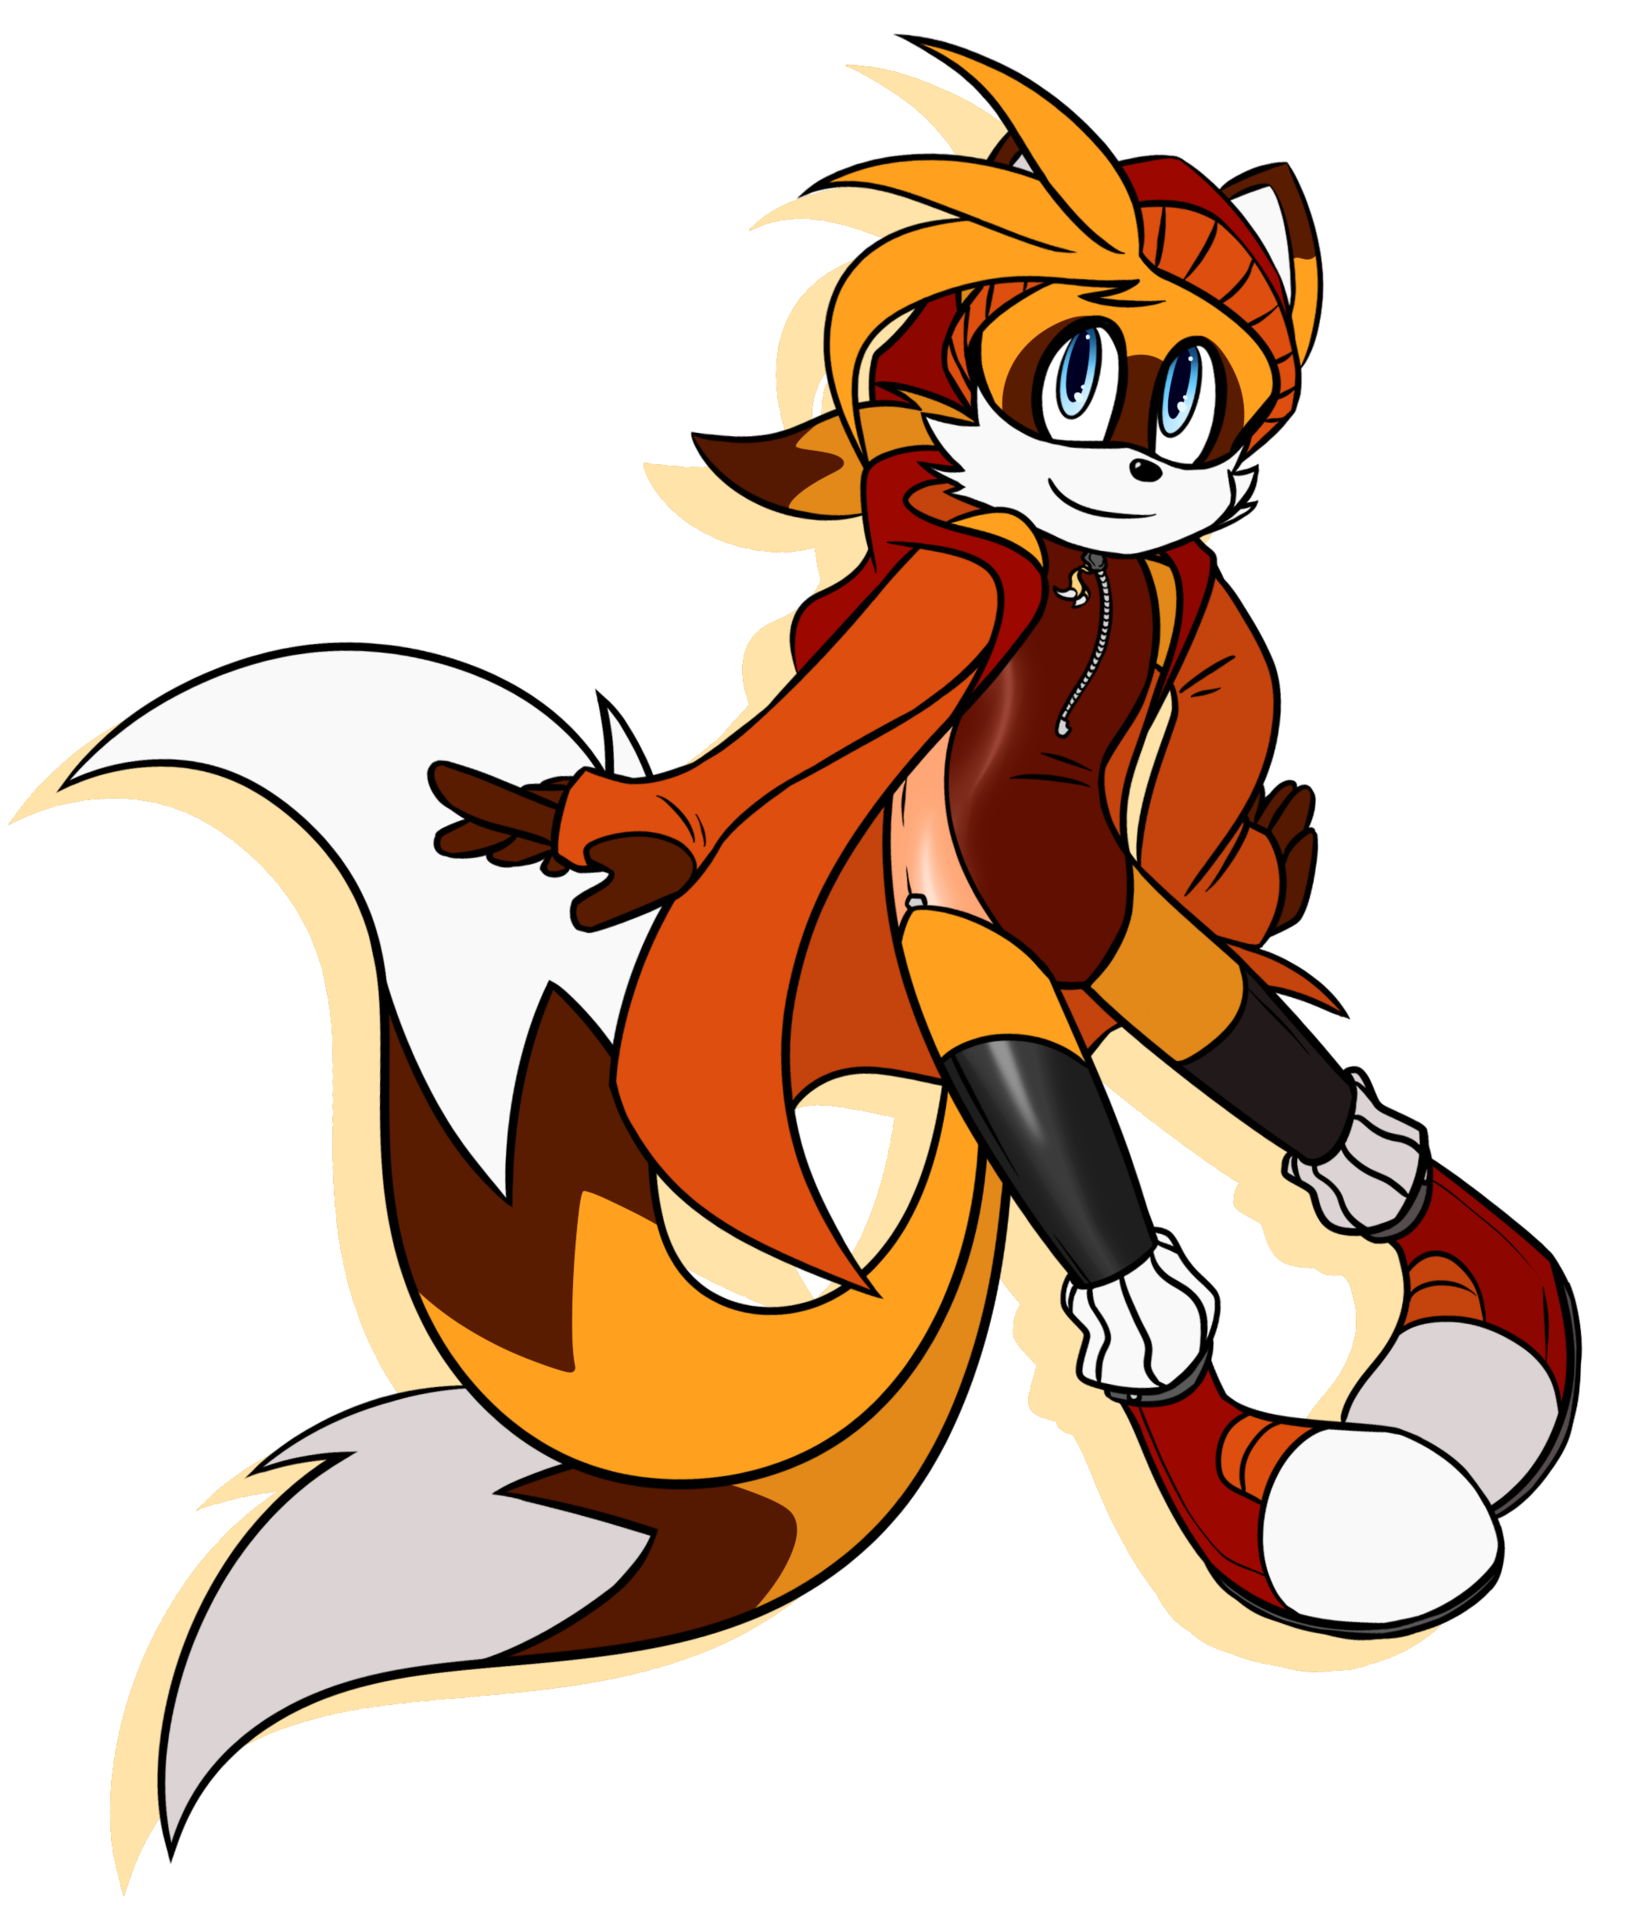 09-21 traditional tails.png